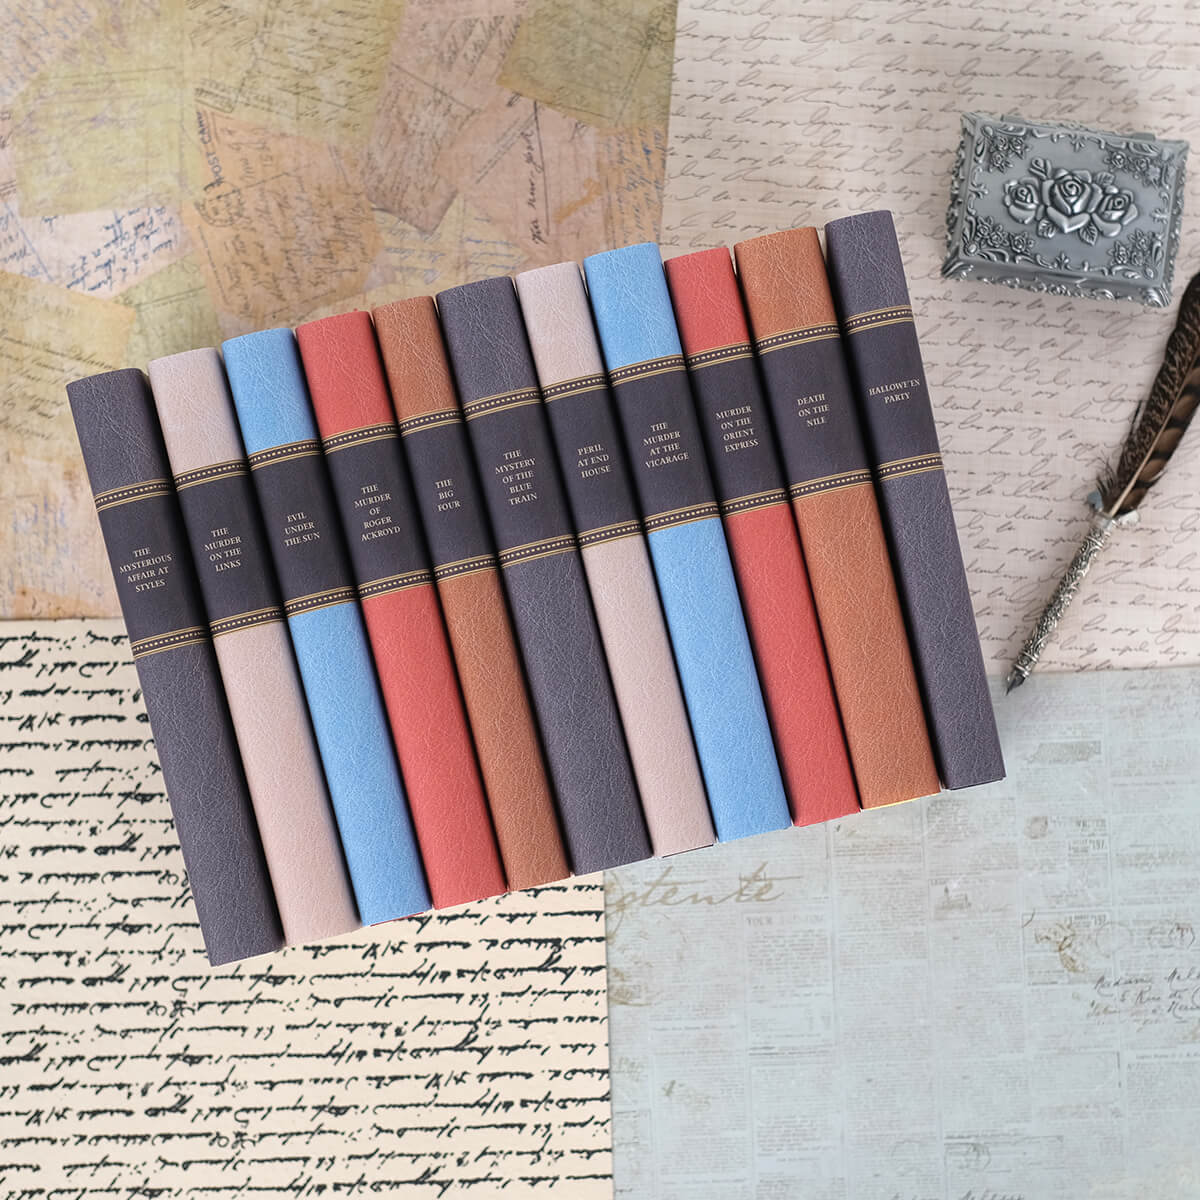 Agatha Christie books wrapped in custom collectible faux leather dust jackets sit against background of cursive letter and newsprint.. Book spines feature book titles typed in gold color serif font set against back faux leather.